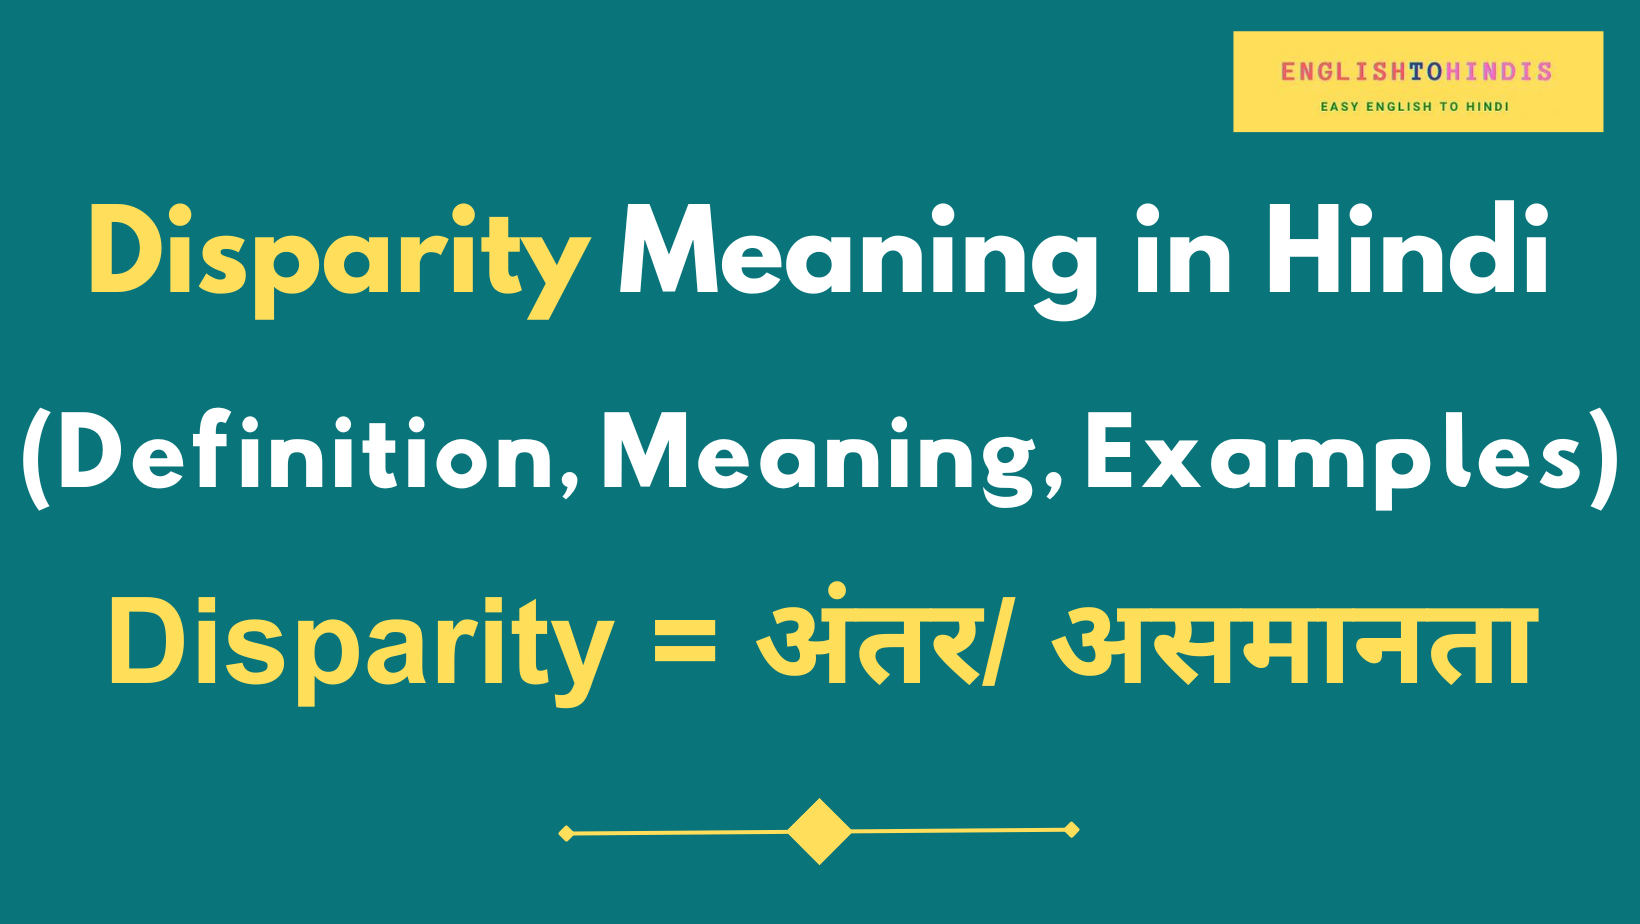 Disparity Meaning in Hindi